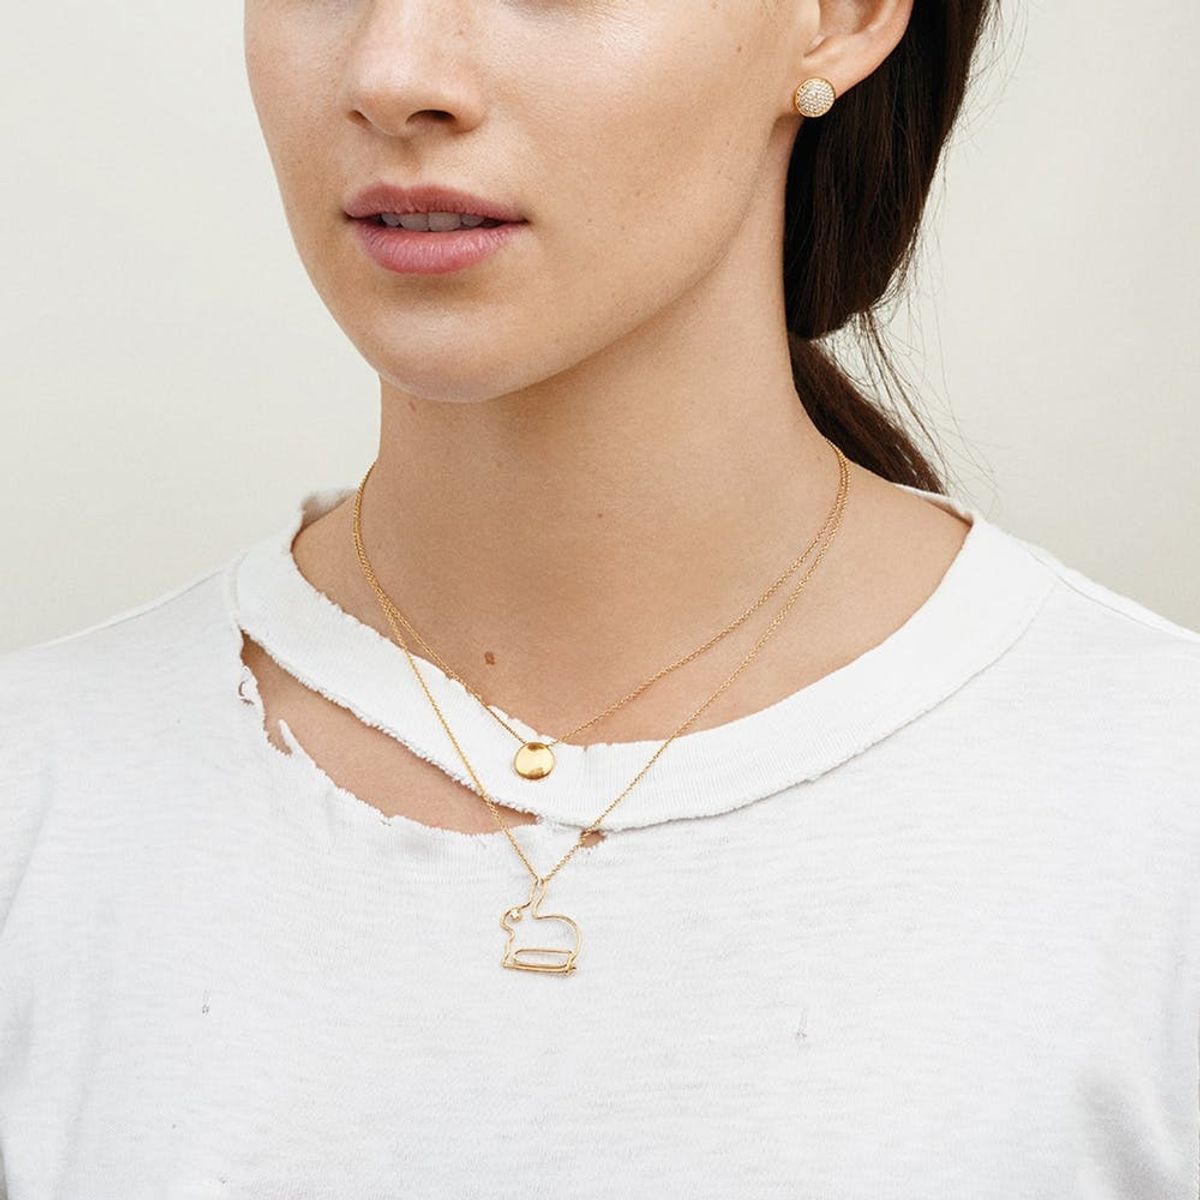 This Is the Prettiest Paper Clip Jewelry You’ll Ever See